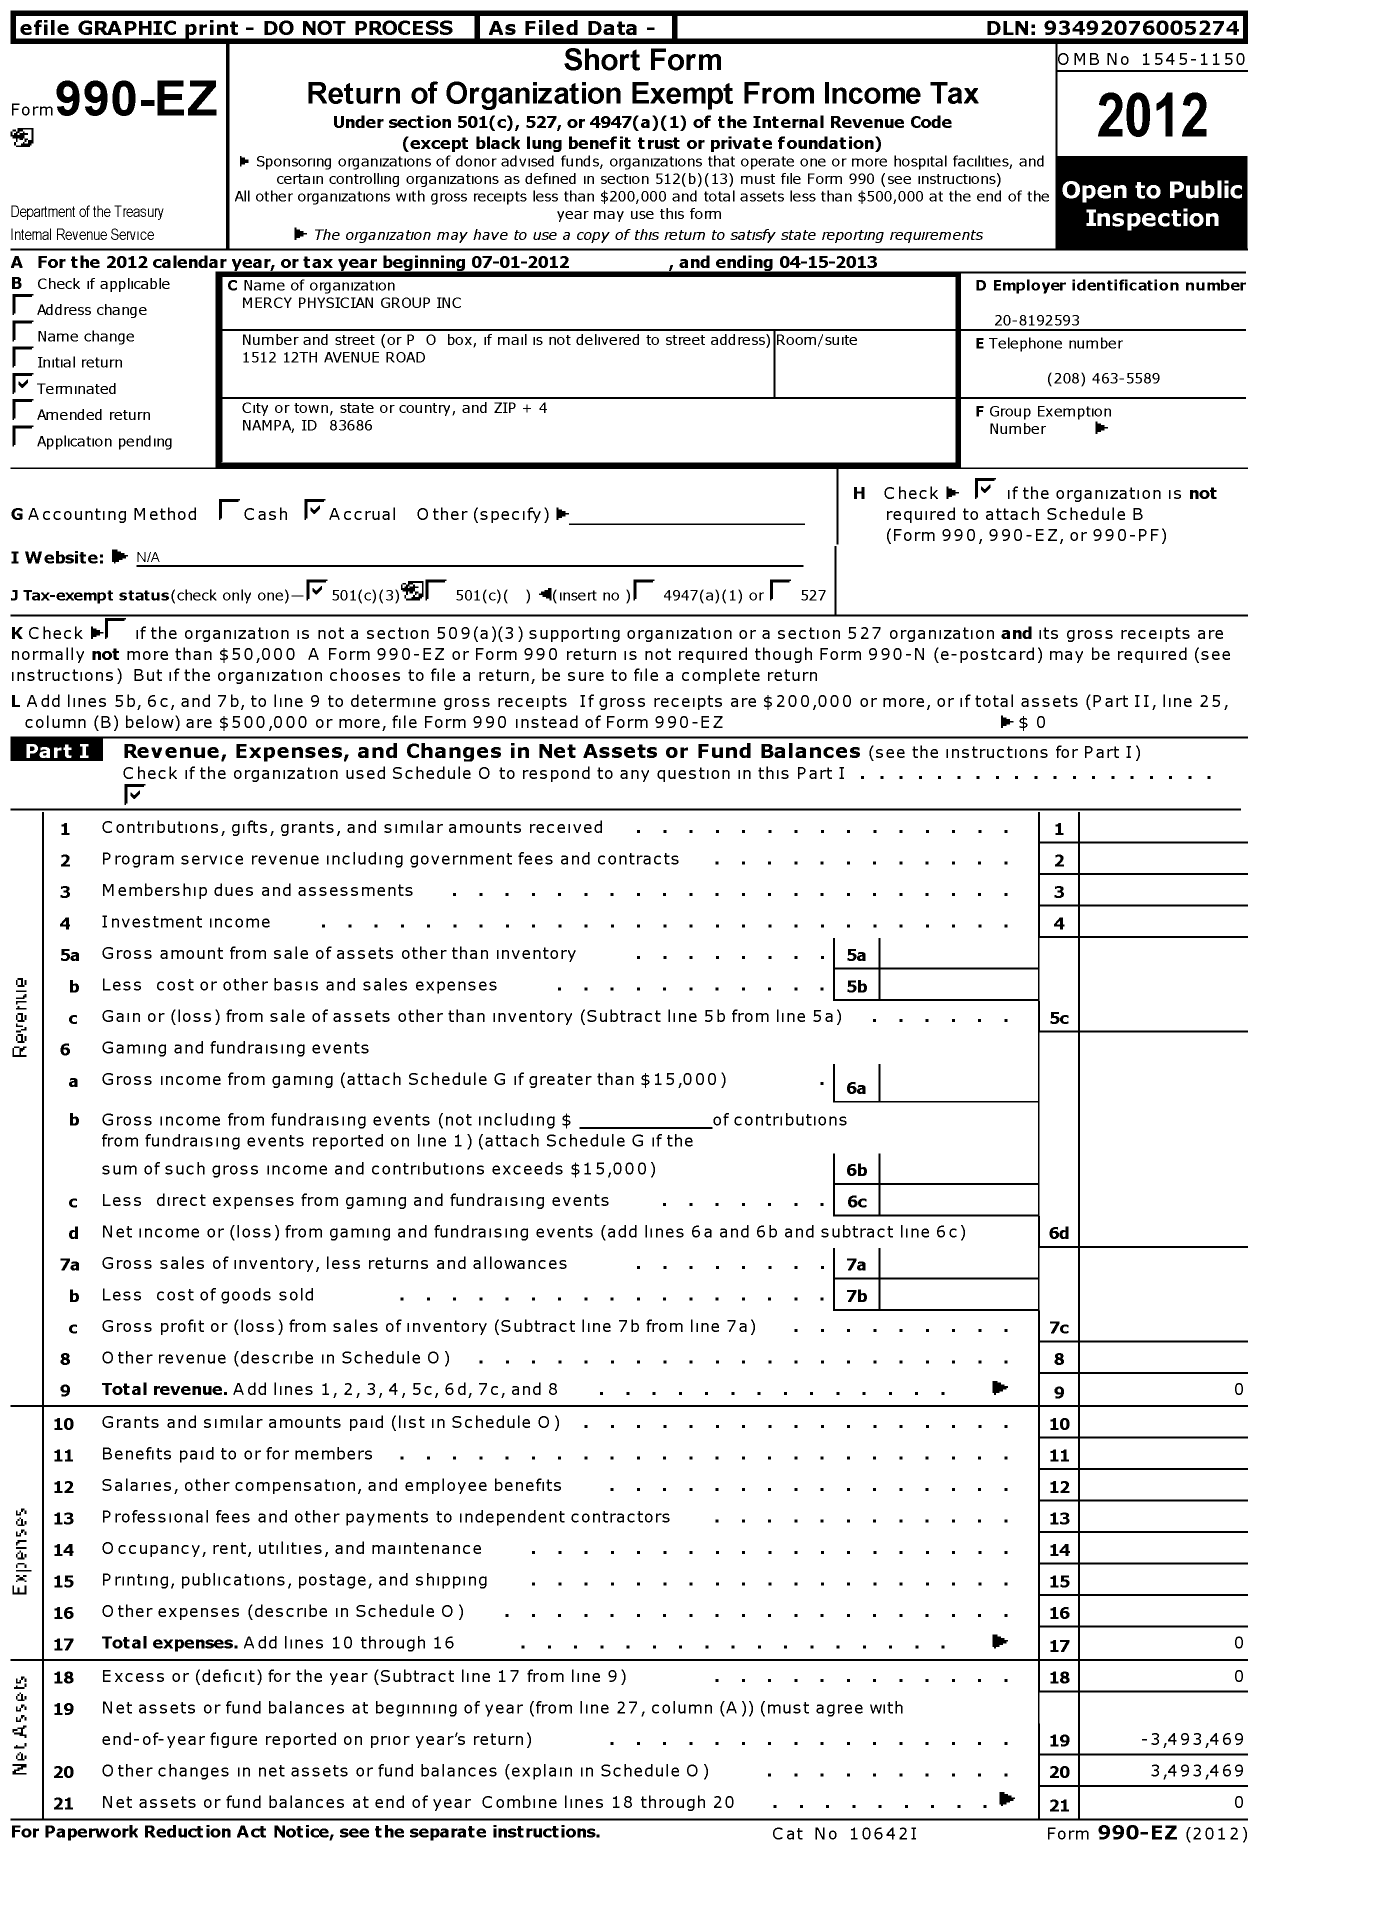 Image of first page of 2012 Form 990EZ for Mercy Physician Group